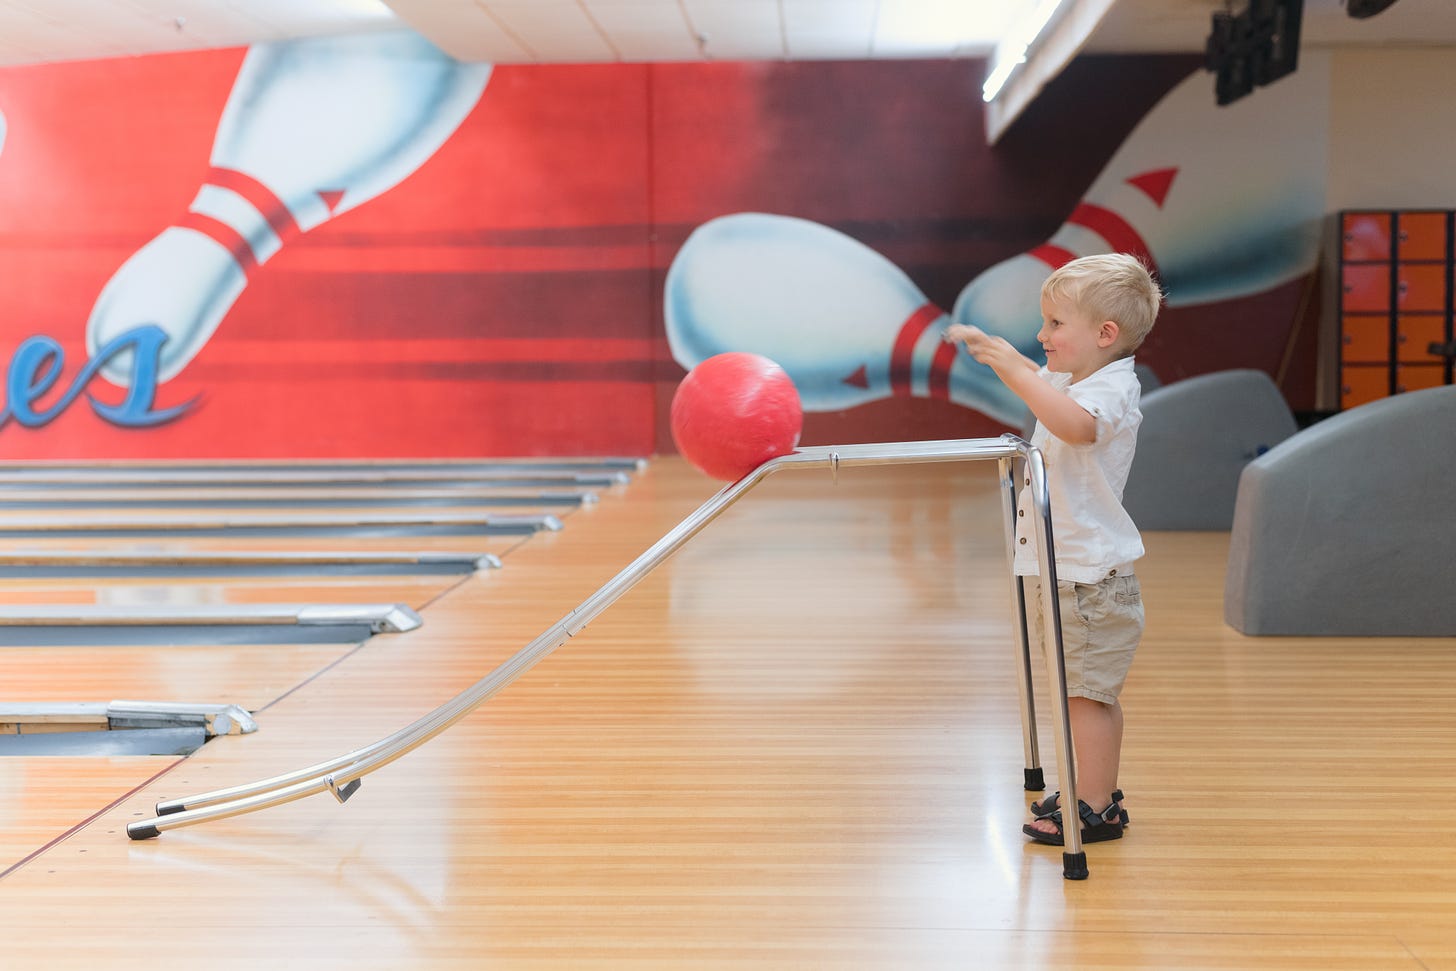 Profile picture of a young boy at a bowling alley. The boy is using a disability-aid stand to roll his bowling ball down the bowling lane.